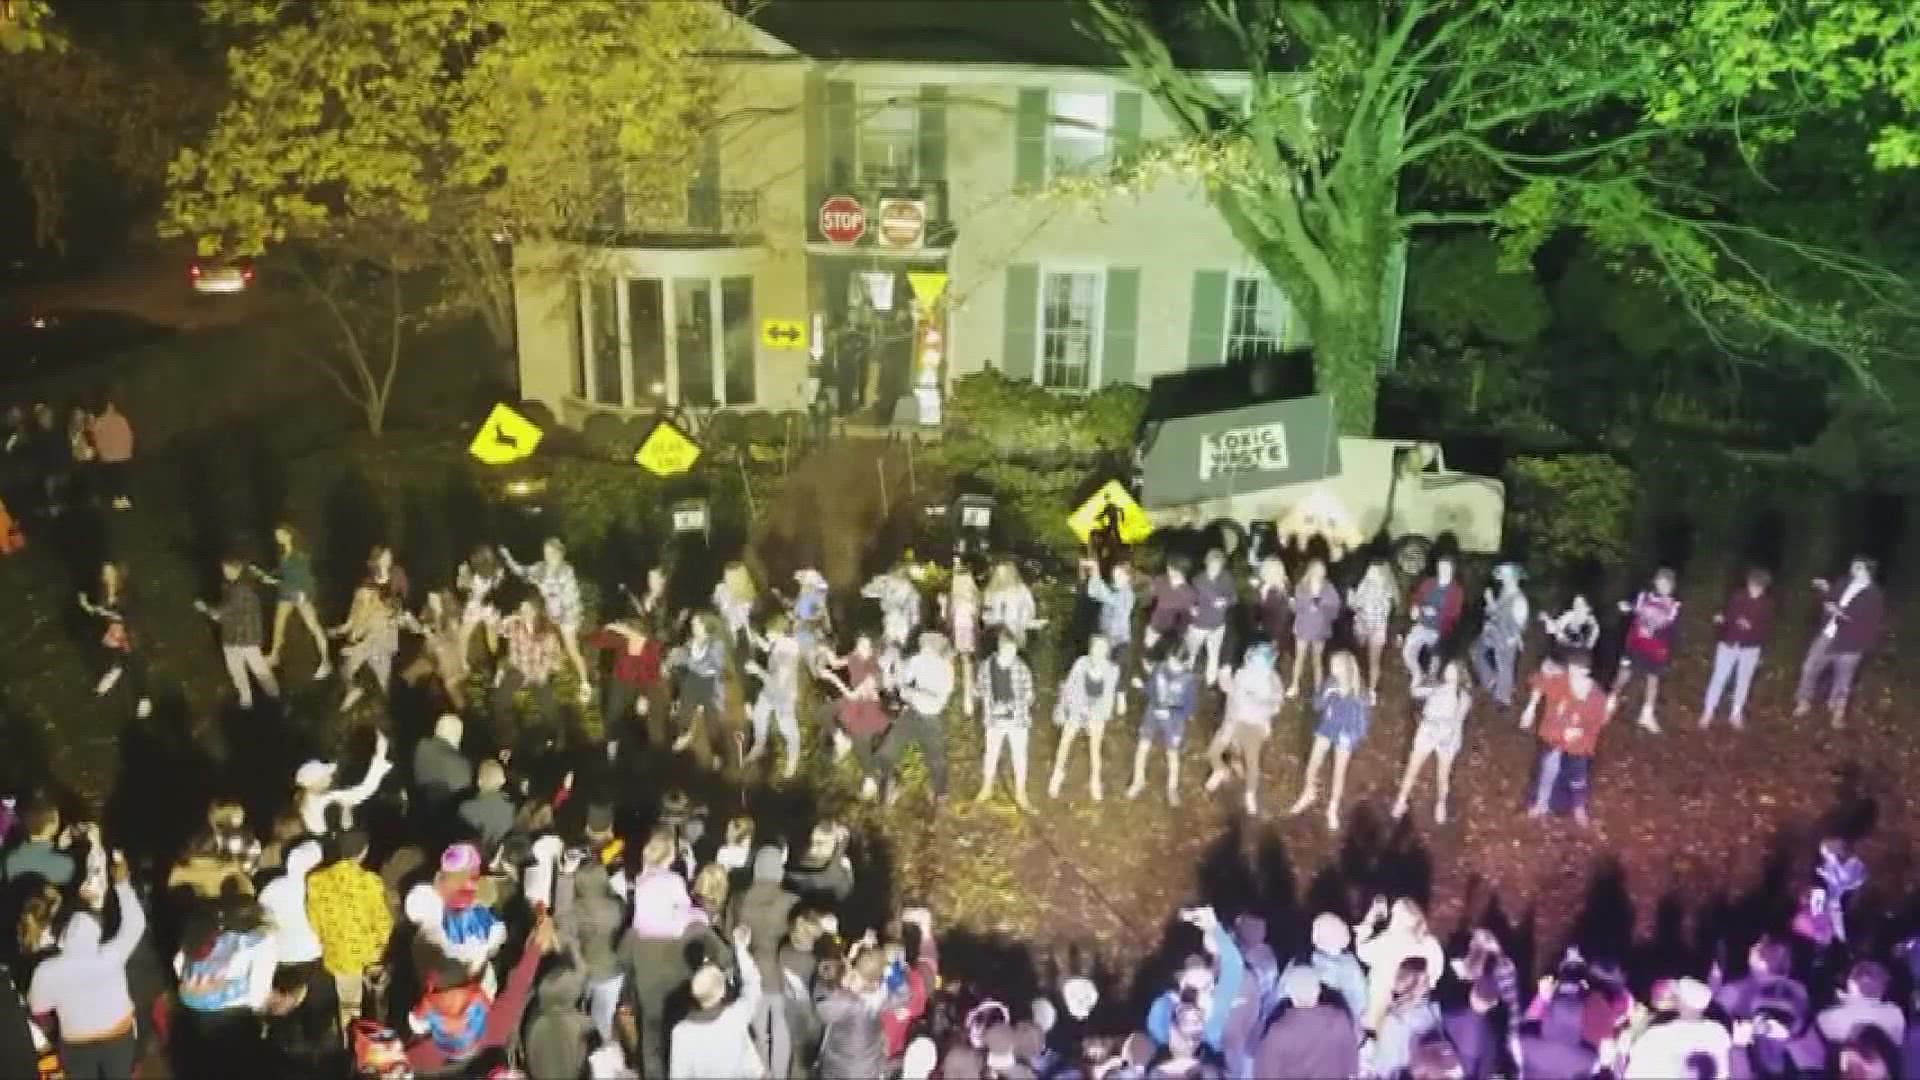 Students in East Grand Rapids pull off Halloween flash mob.